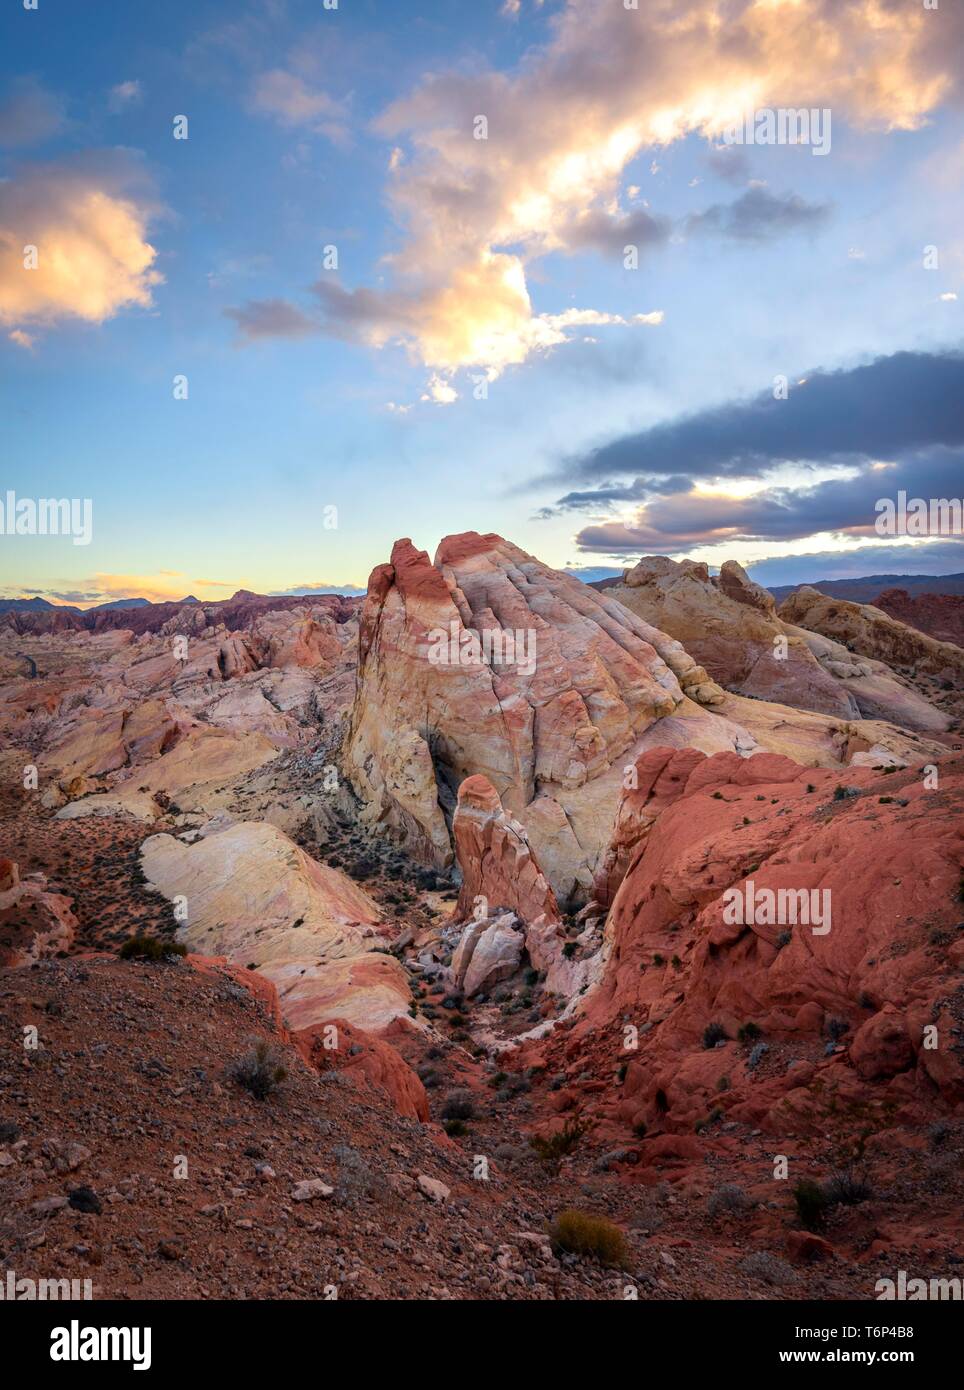 Colorful, red orange rock formations at sunset with colored clouds, White Dome, sandstone rocks, Valley of Fire State Park, Mojave Desert, Nevada, USA Stock Photo